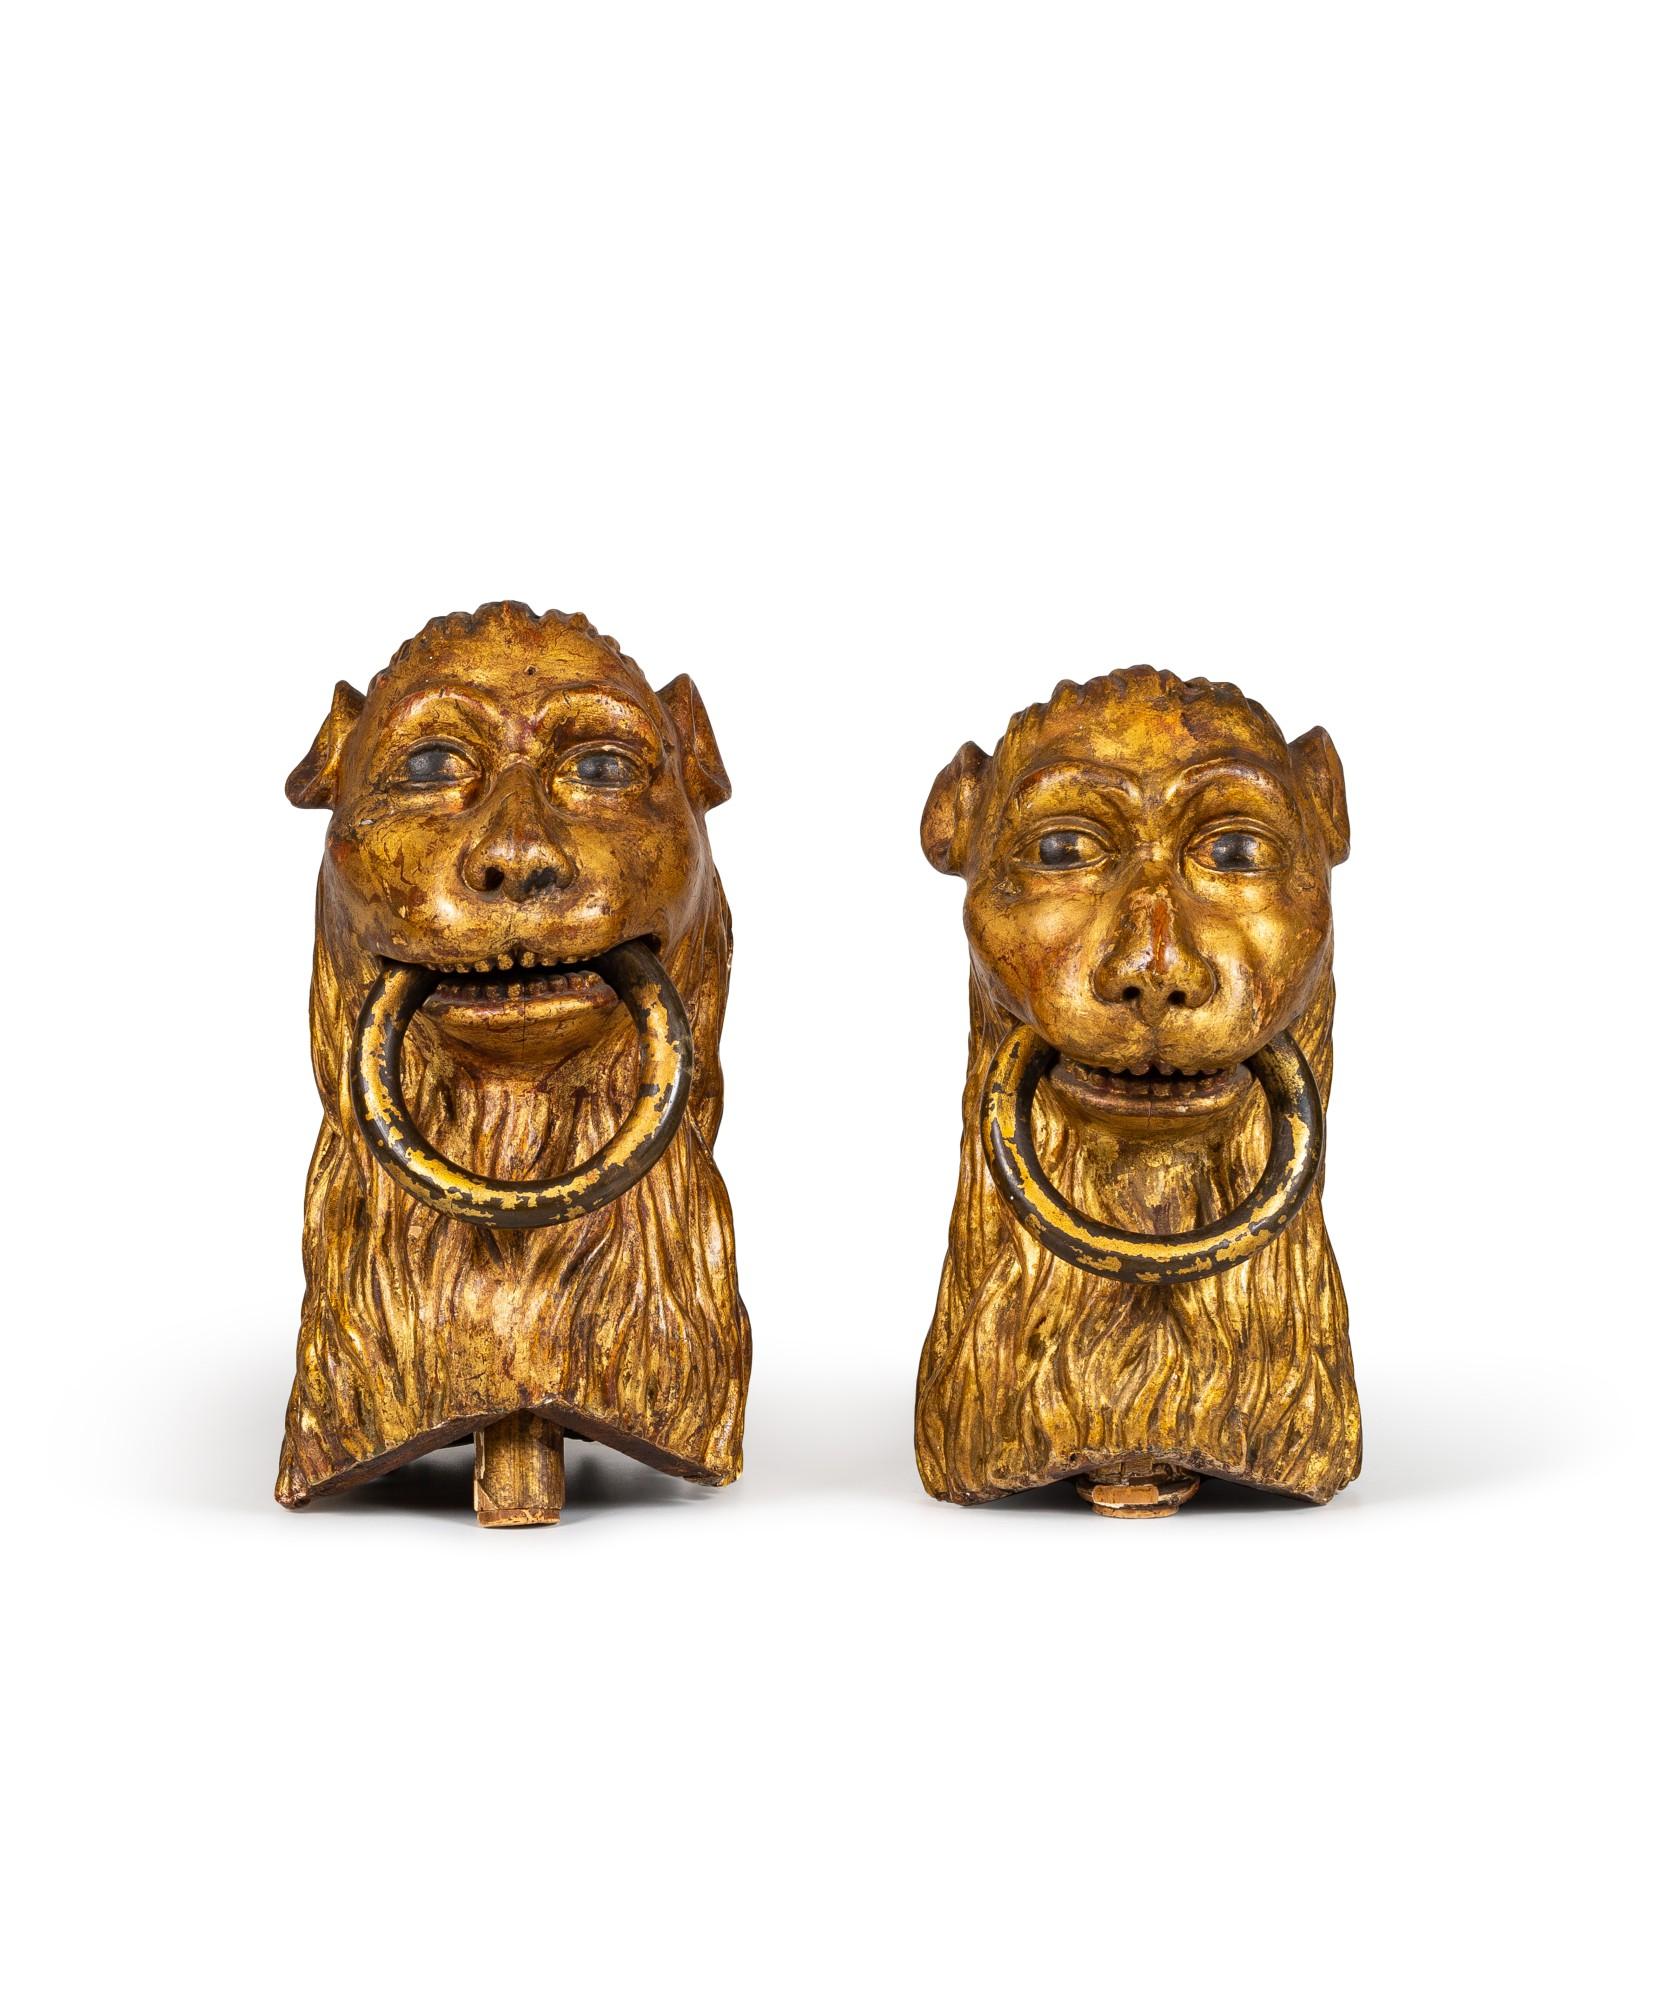 Unknown Figurative Sculpture - SET OF TWO ITALIAN CARVED AND GILT WOODEN HEADS OF LIONS